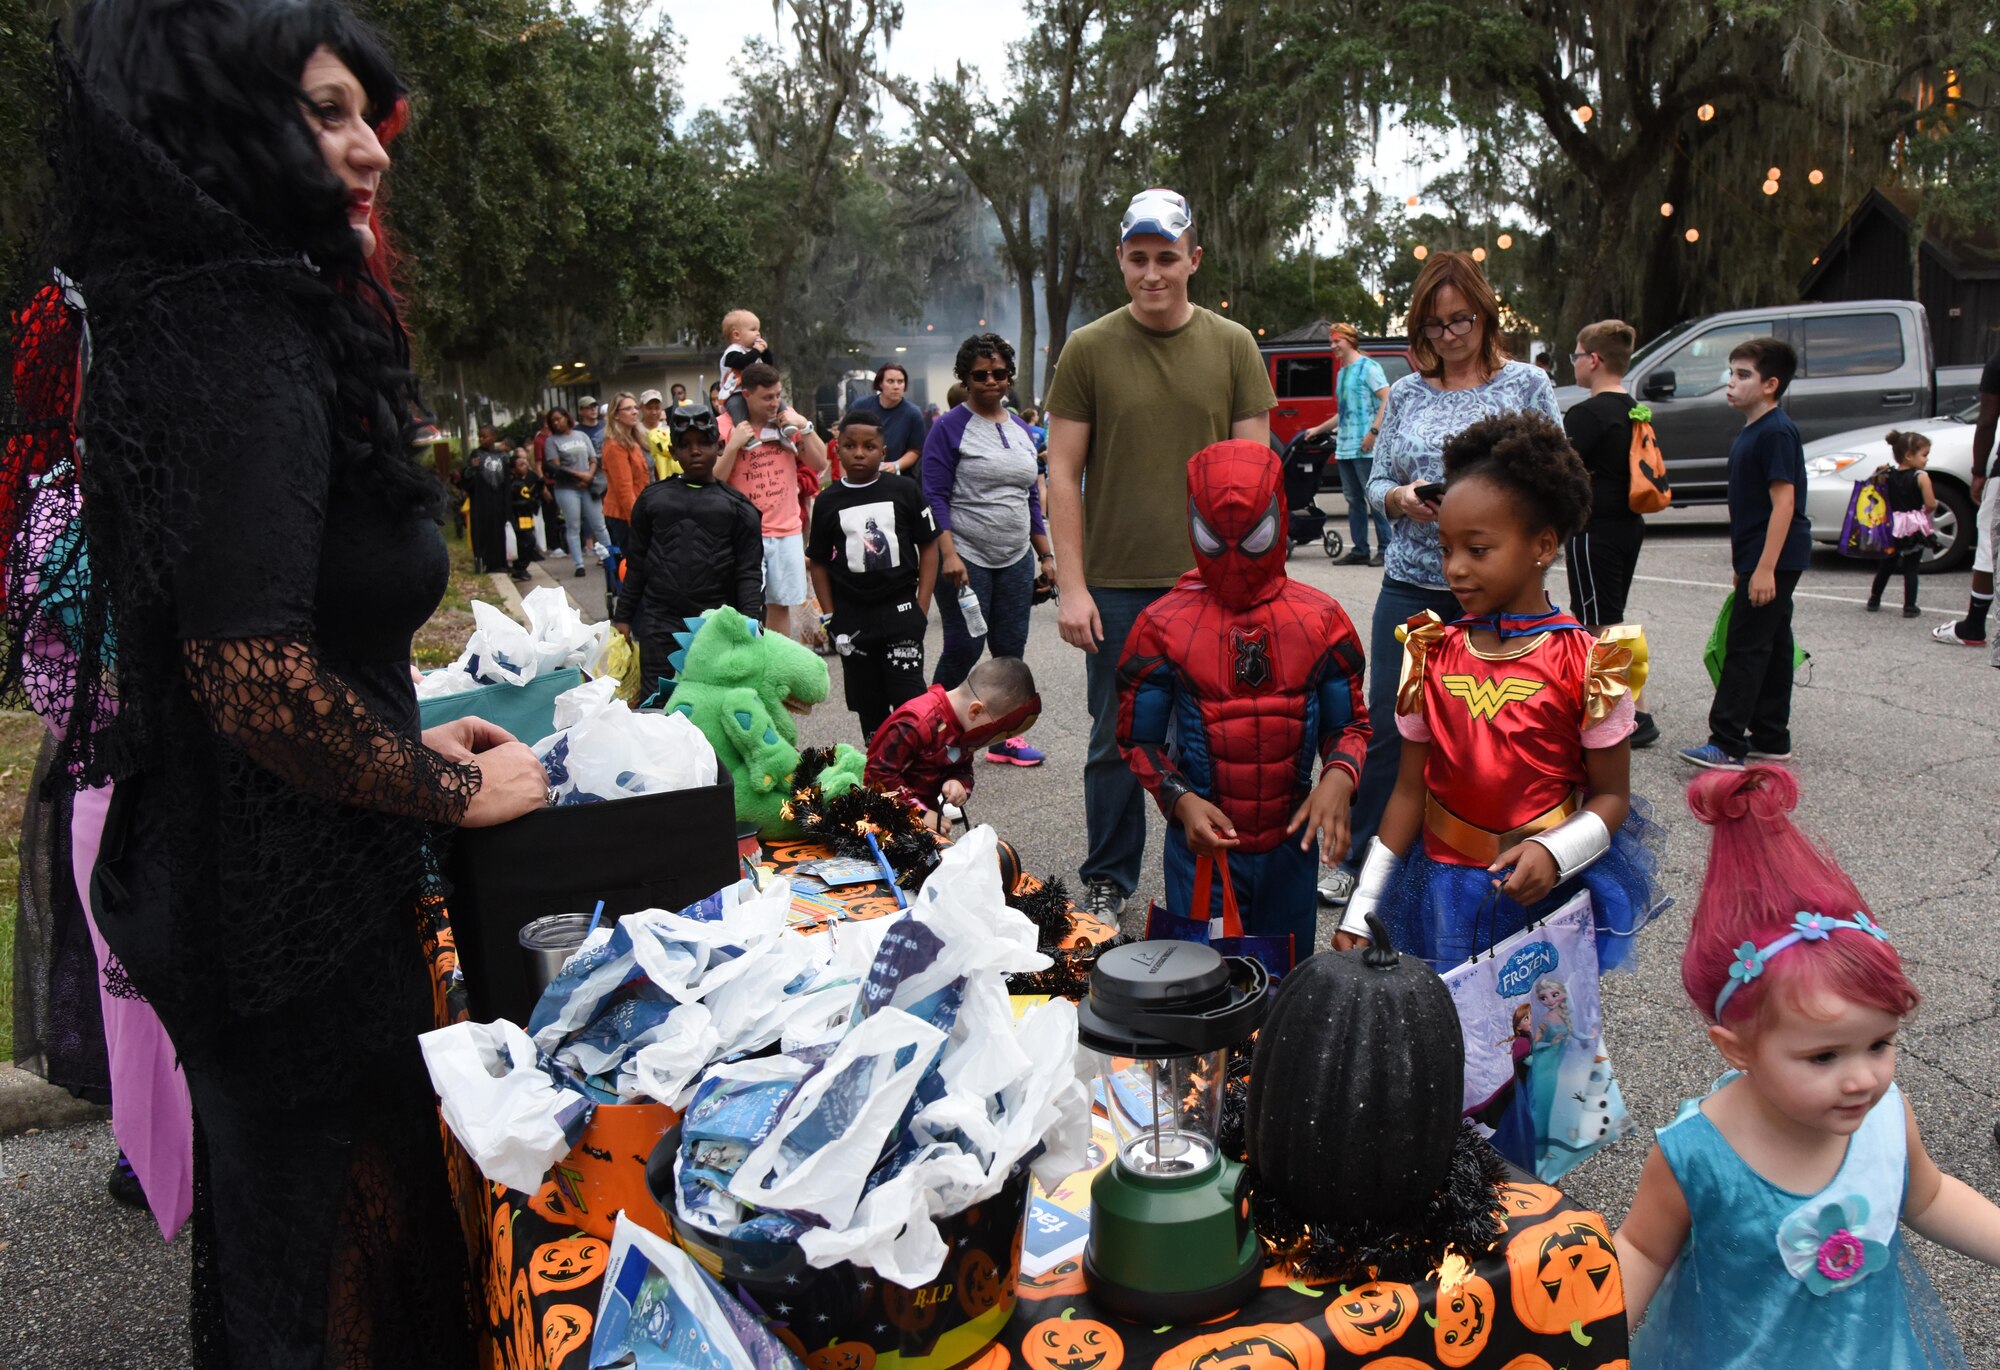 Keesler personnel make their way through the Marina Park collecting candy during Ghouls in the Park Oct. 27, 2017, on Keesler Air Force Base, Mississippi. Ghouls in the Park also featured an alien bus, a haunted house, “Trunk or Treat” and games for children of all ages. (U.S. Air Force photo by Kemberly Groue)